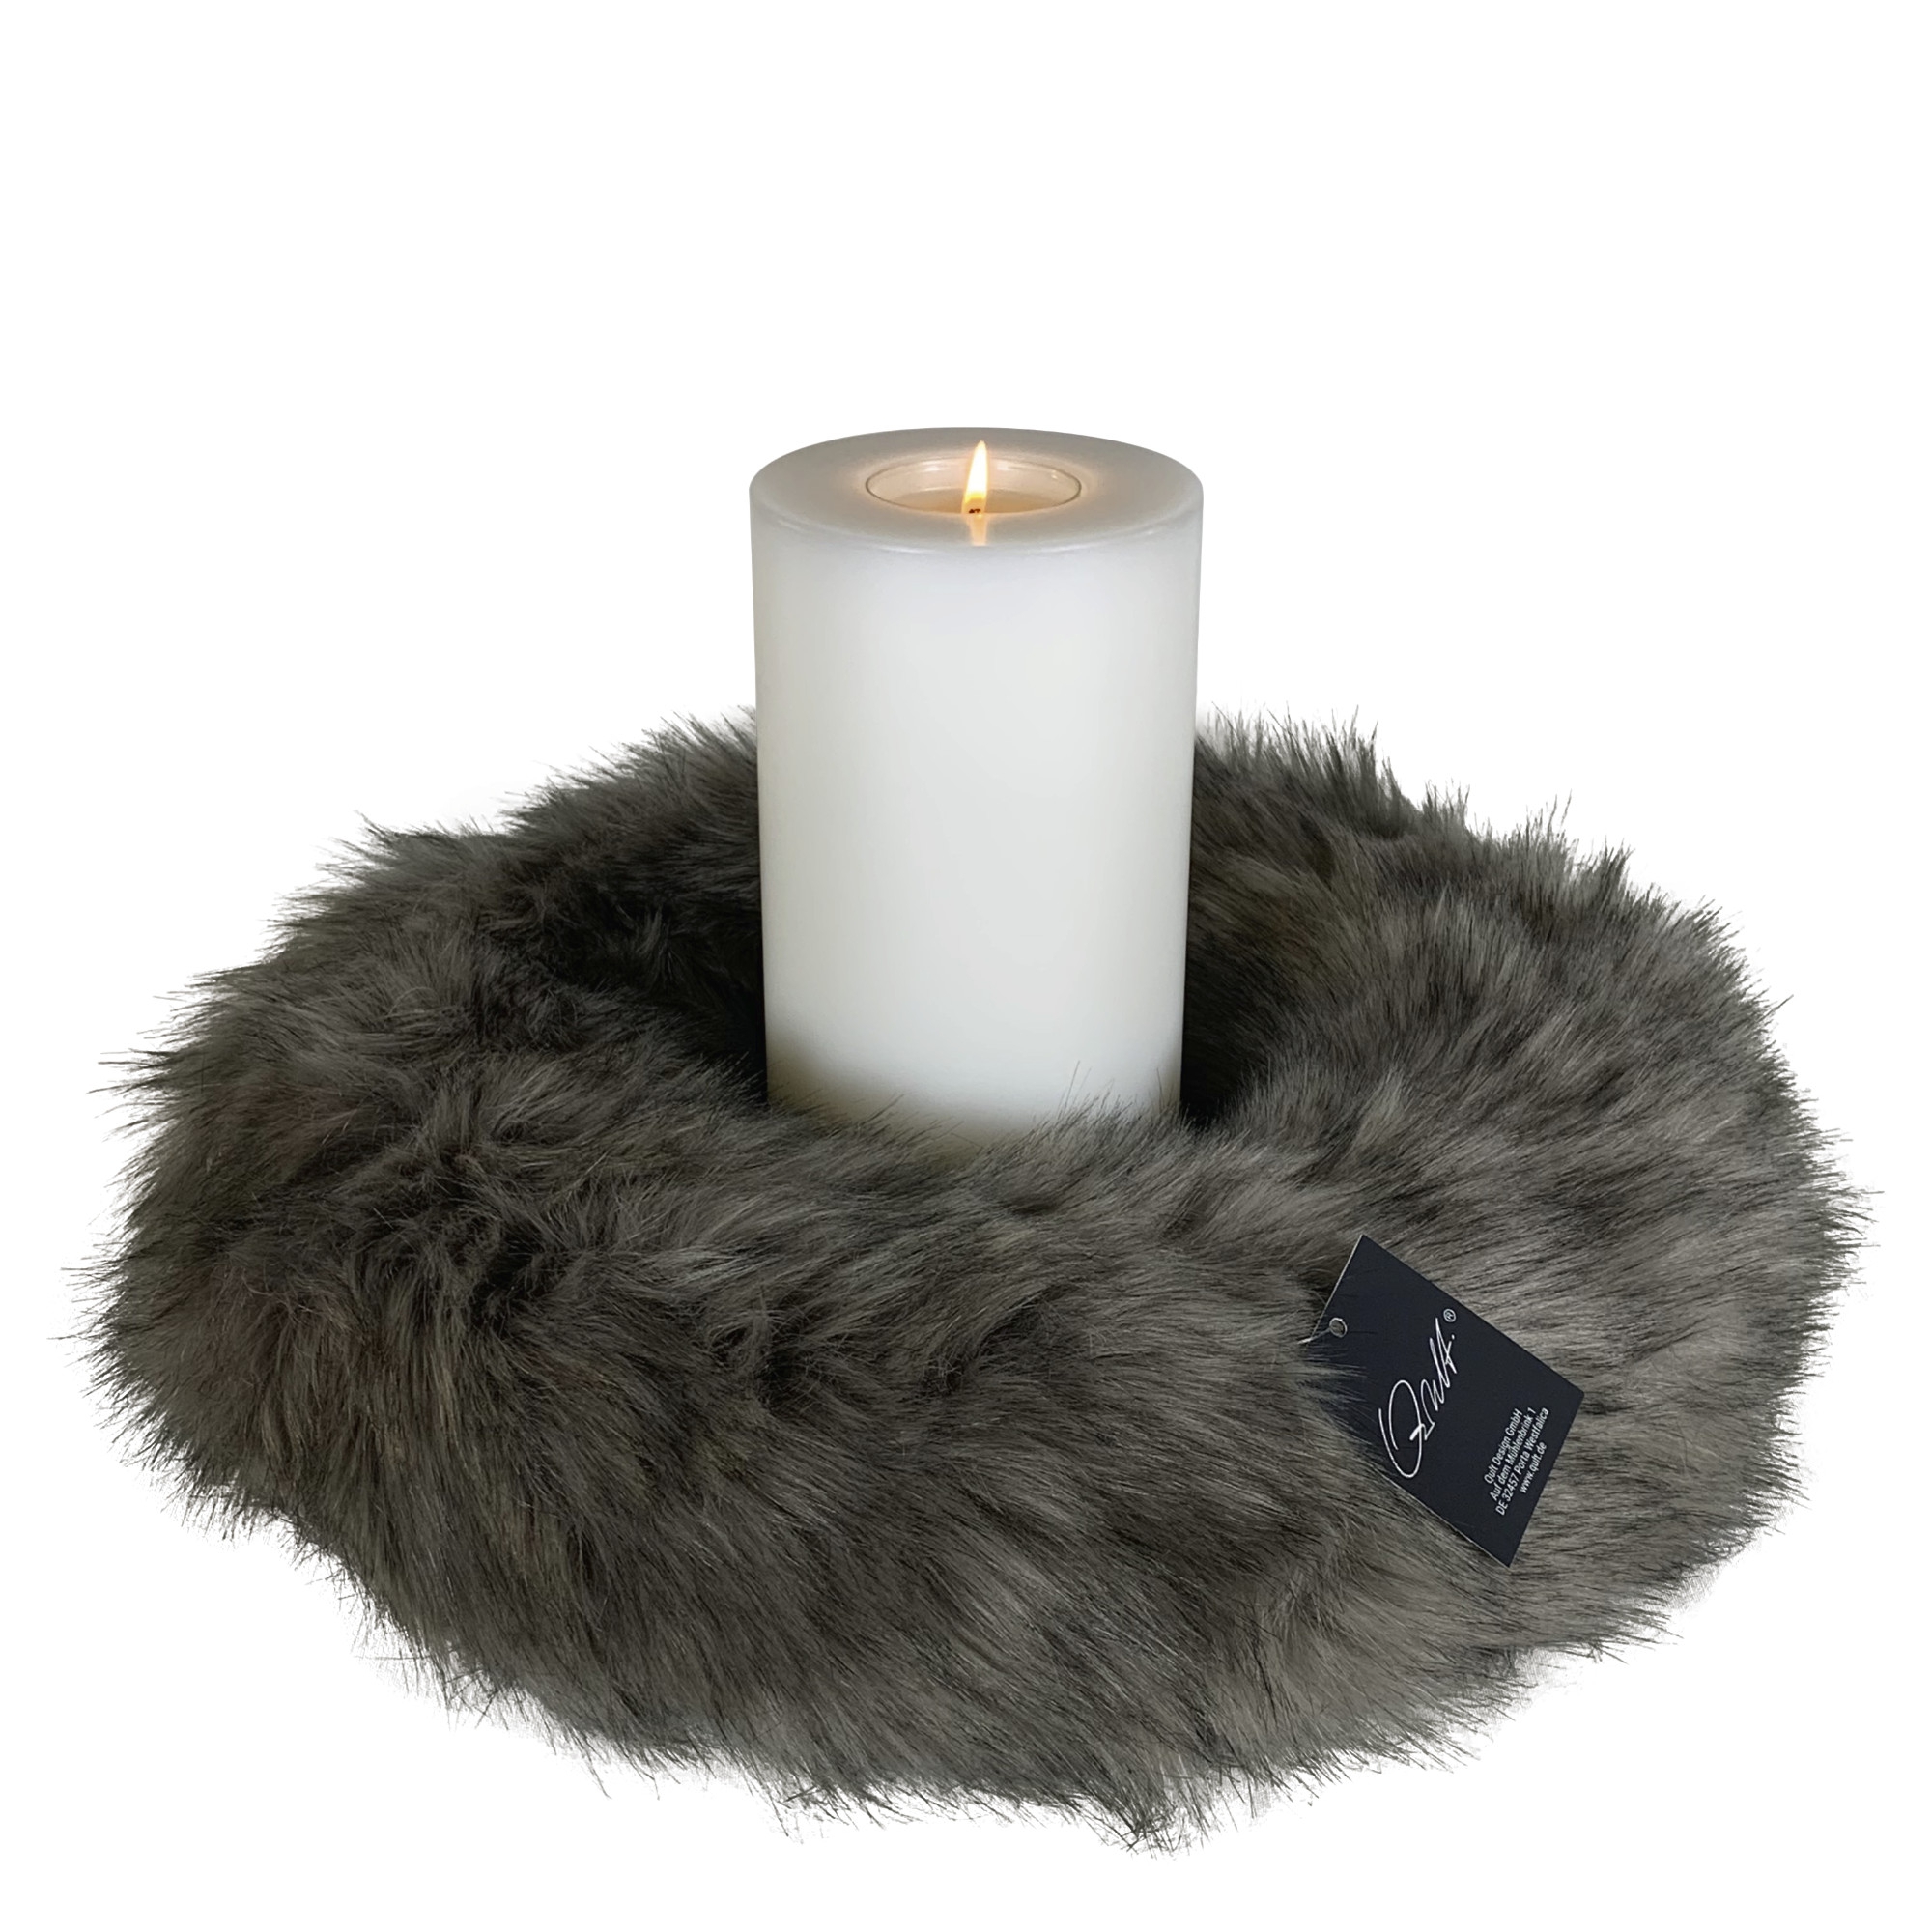 Qult Farluce Candle - Milano Woven Fur Grey - Candle wreath - Ø 45